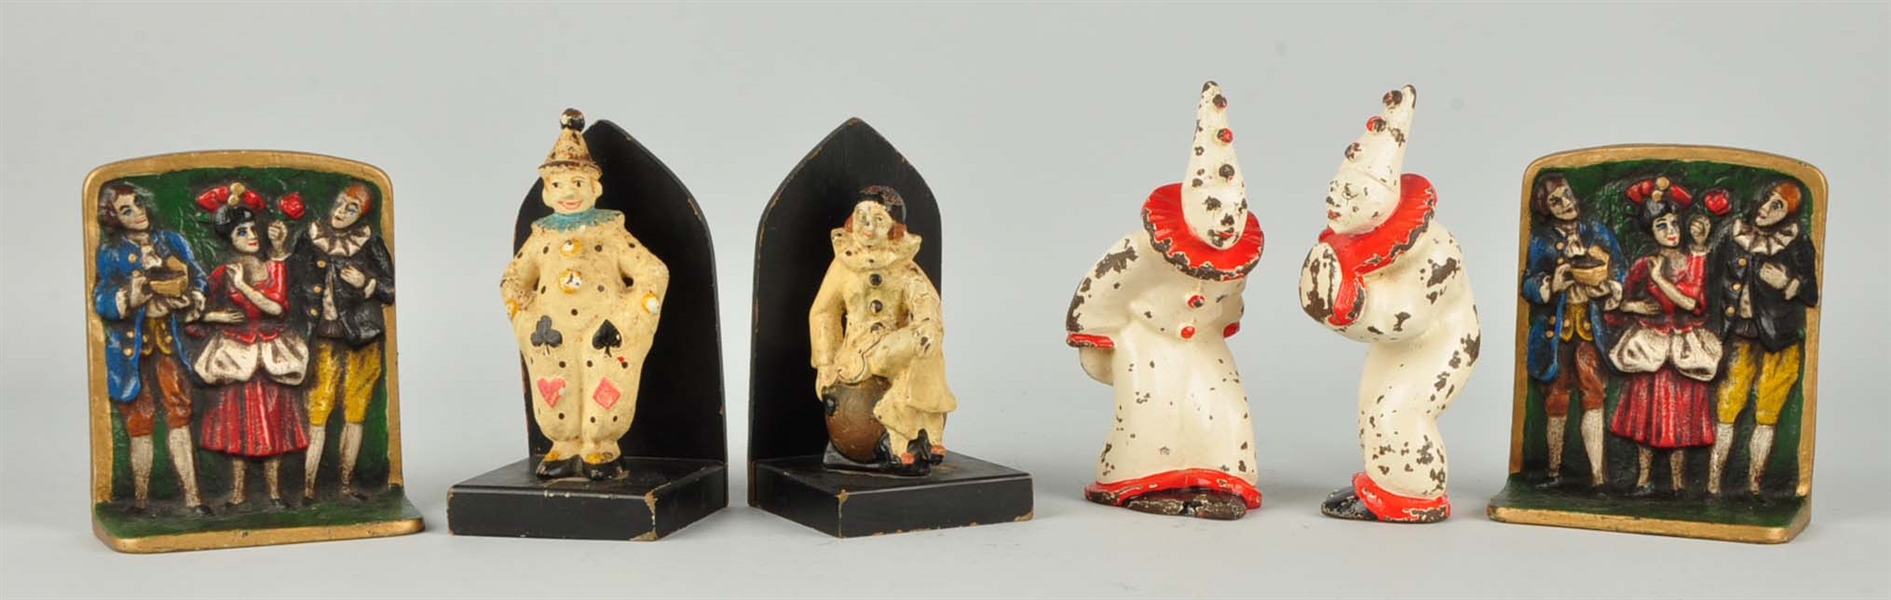 LOT OF 3 PAIRS:  CLOWN HARLEQUIN BOOKENDS.